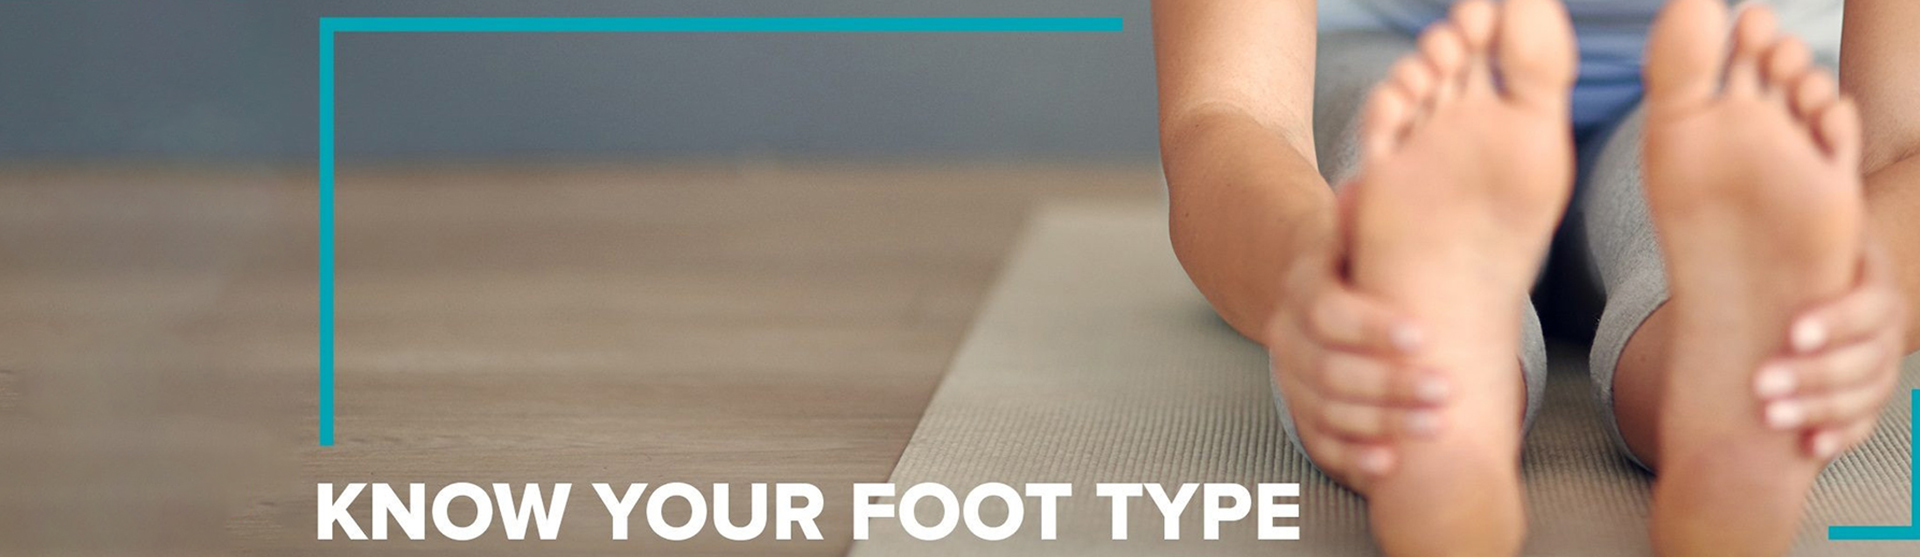 know foot type11